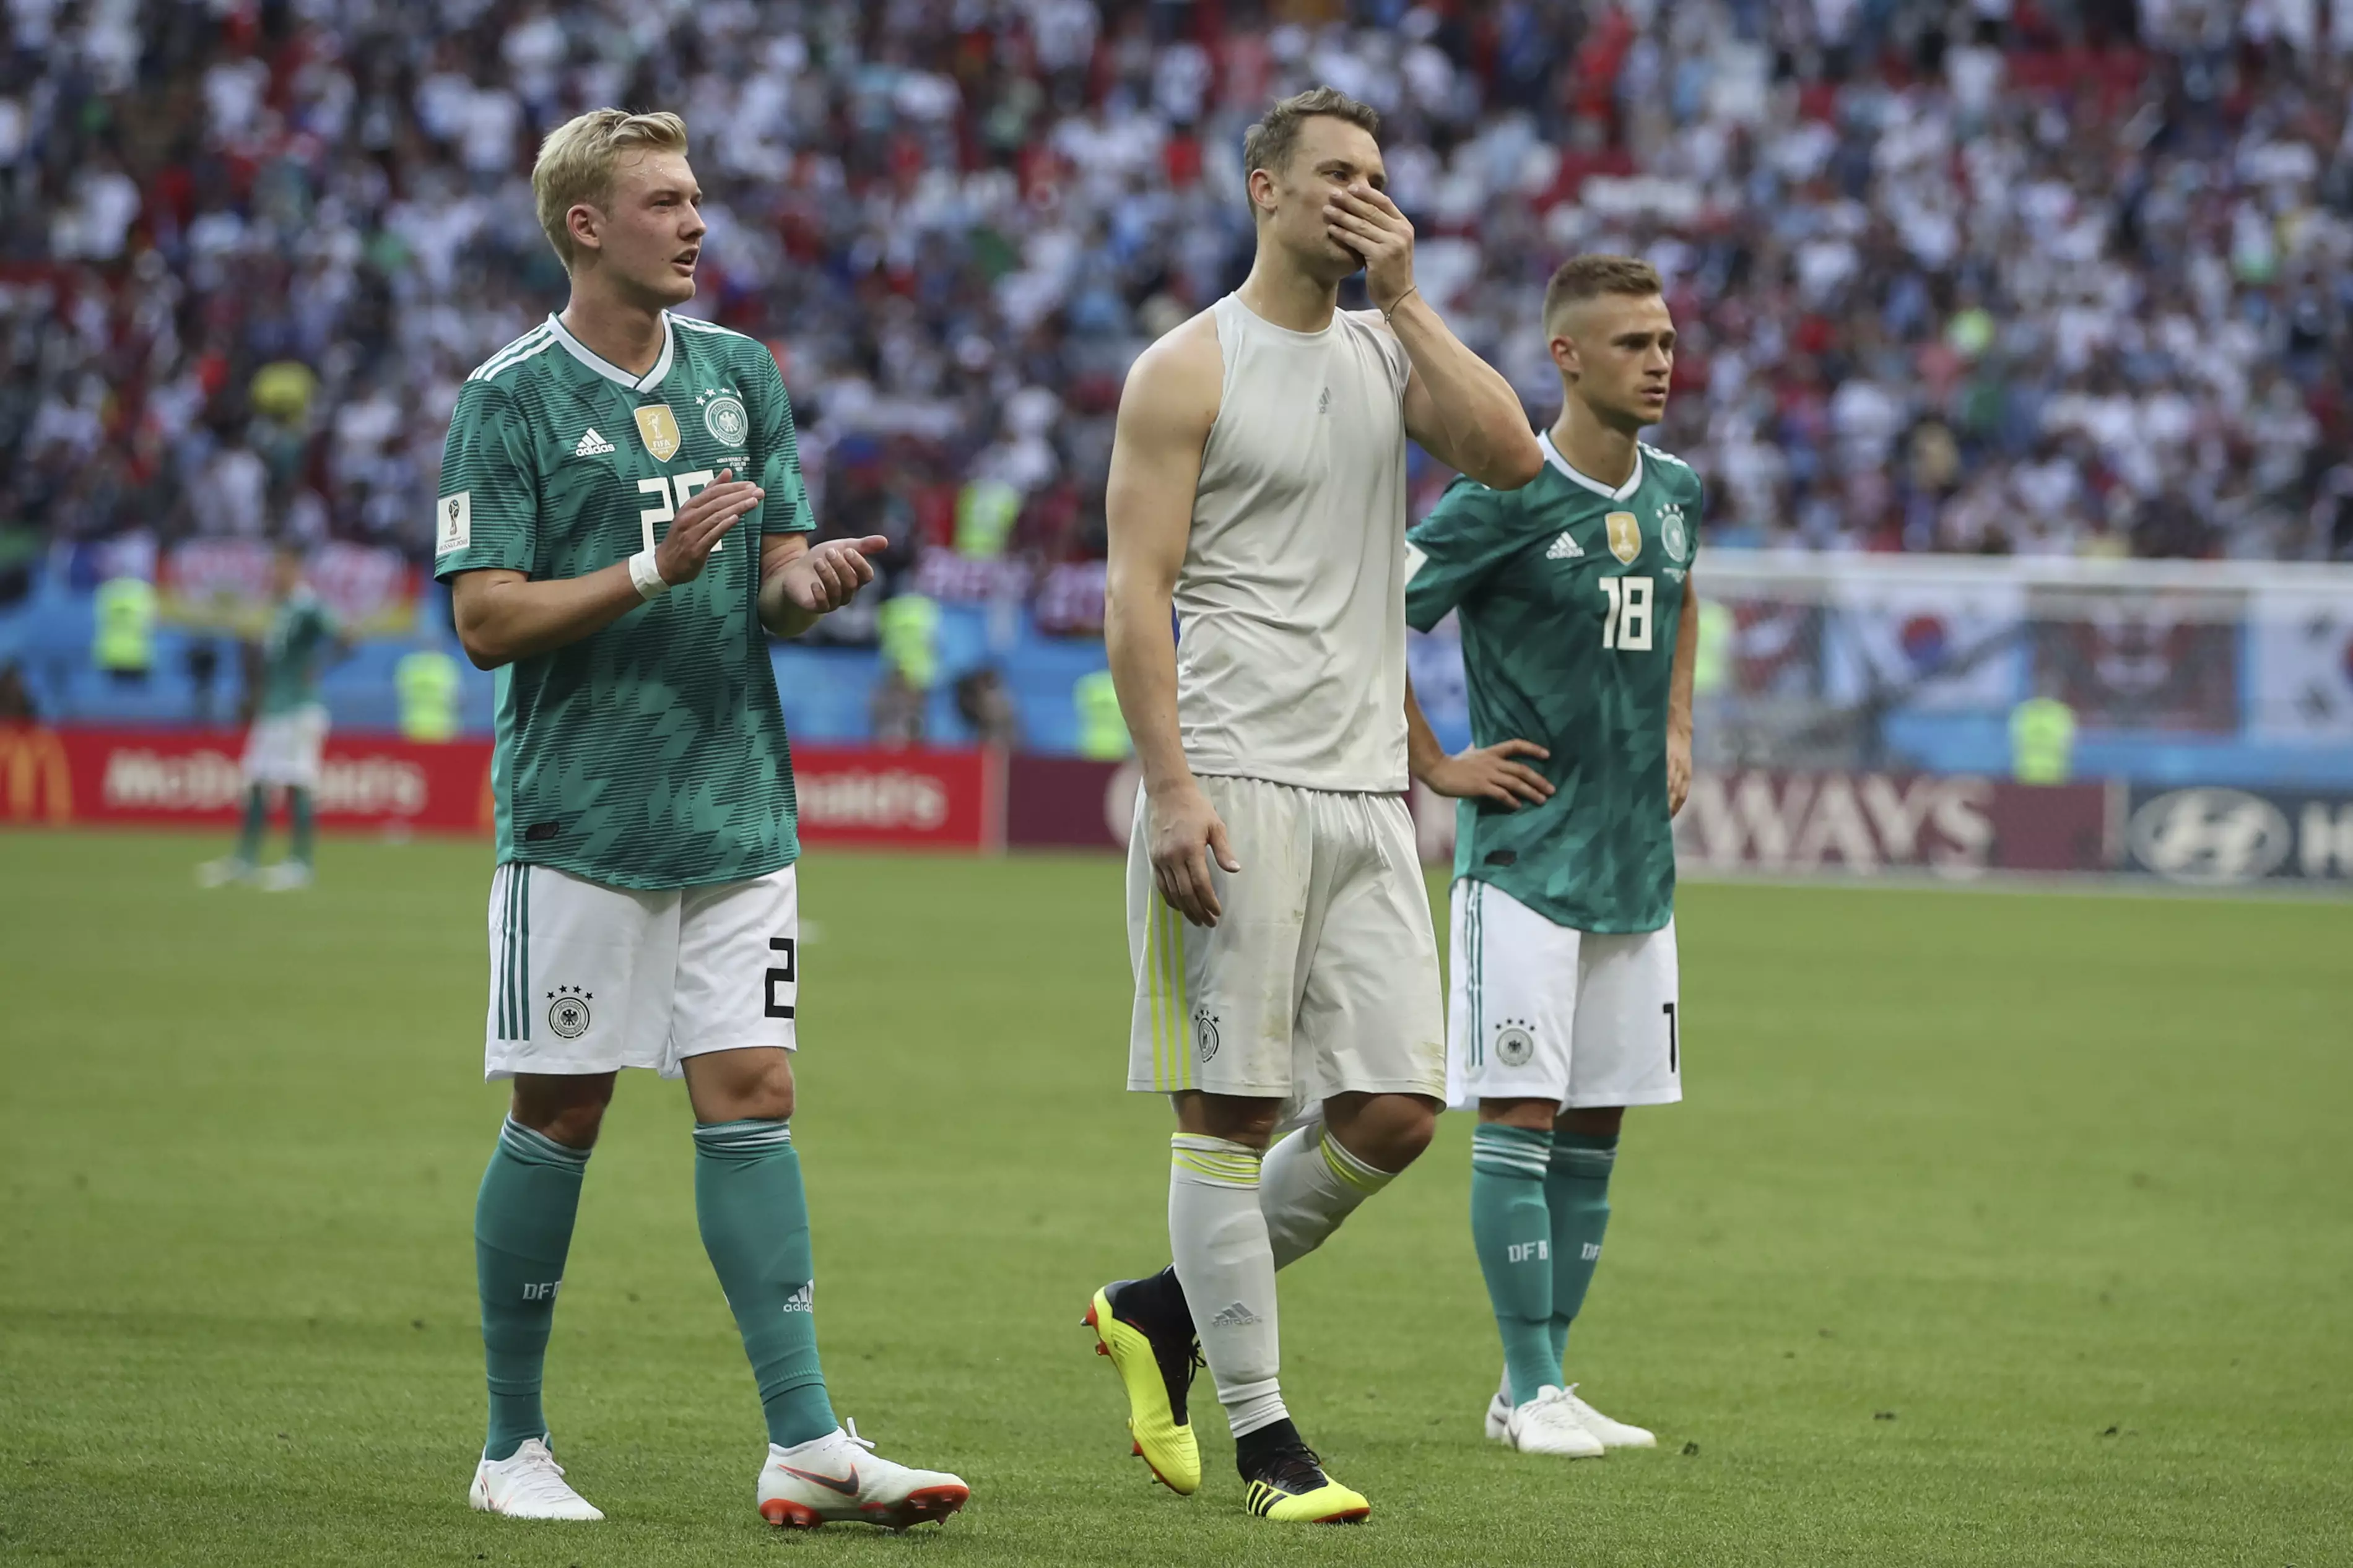 The German player walk off the pitch. Image: PA